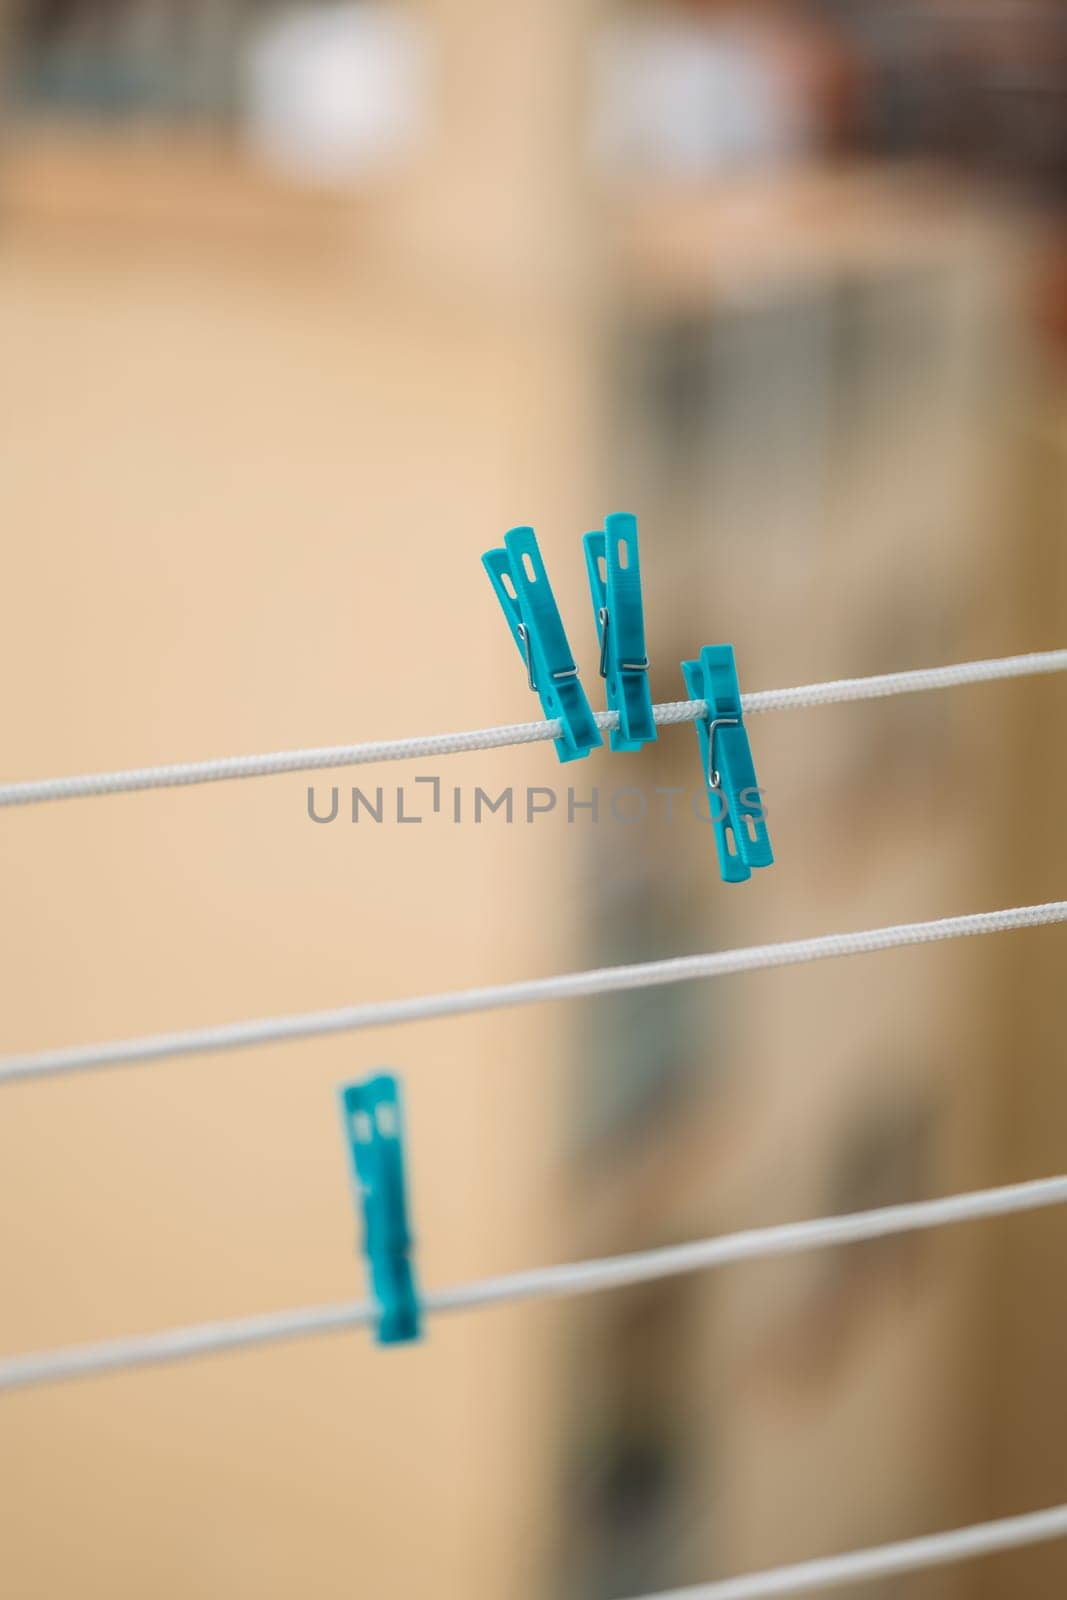 Blue Clothes Pins Are Hanging On A Clothes Line with urban background